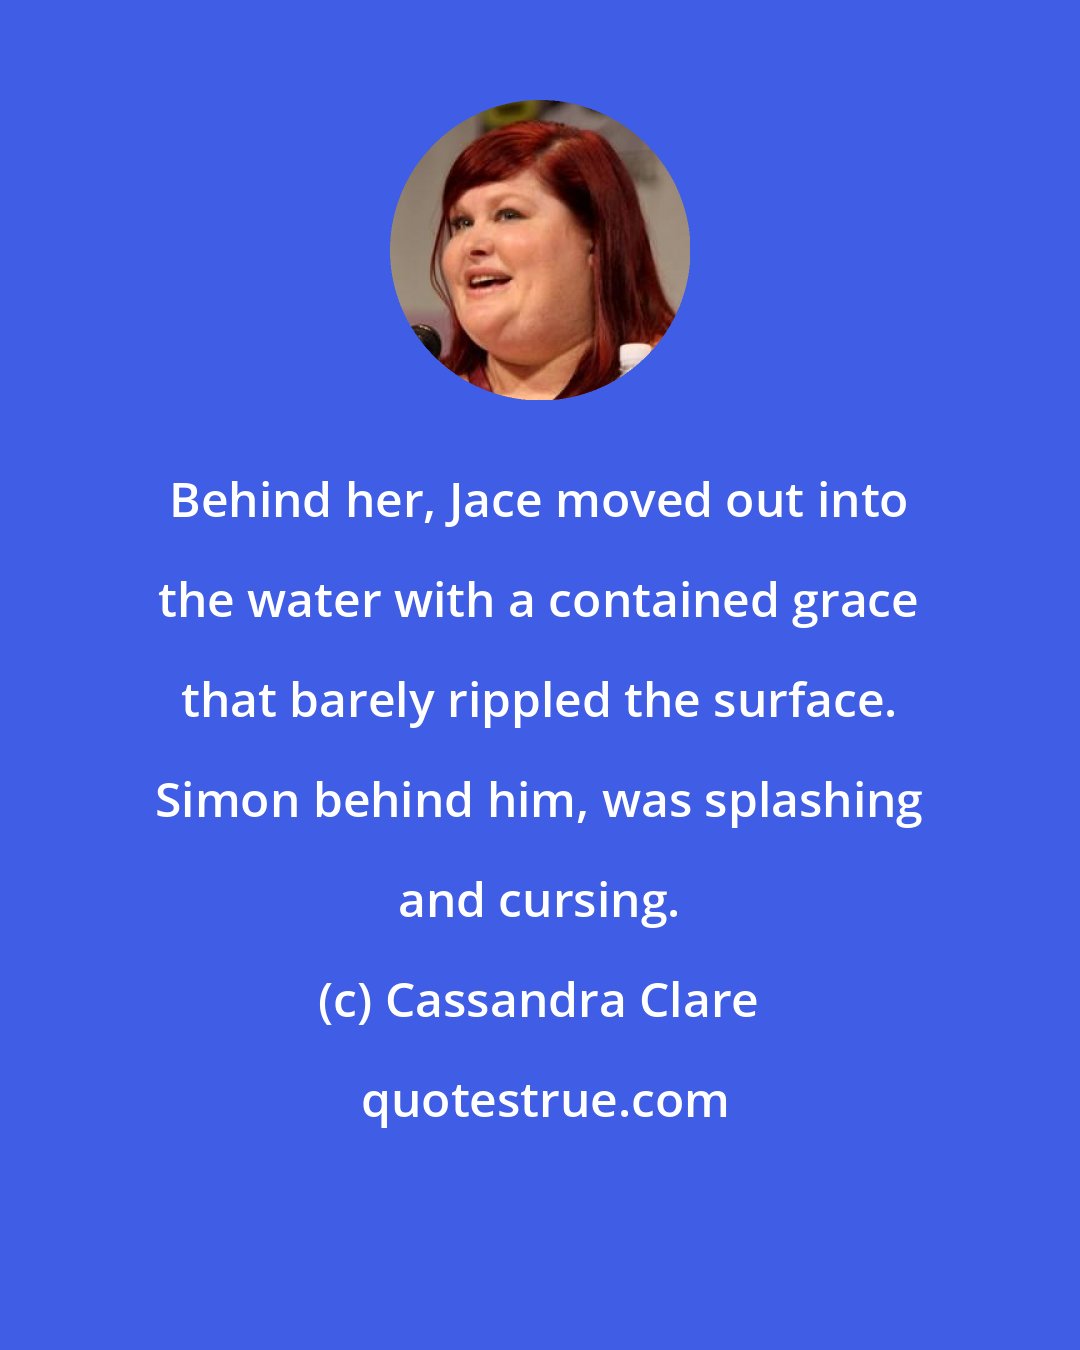 Cassandra Clare: Behind her, Jace moved out into the water with a contained grace that barely rippled the surface. Simon behind him, was splashing and cursing.